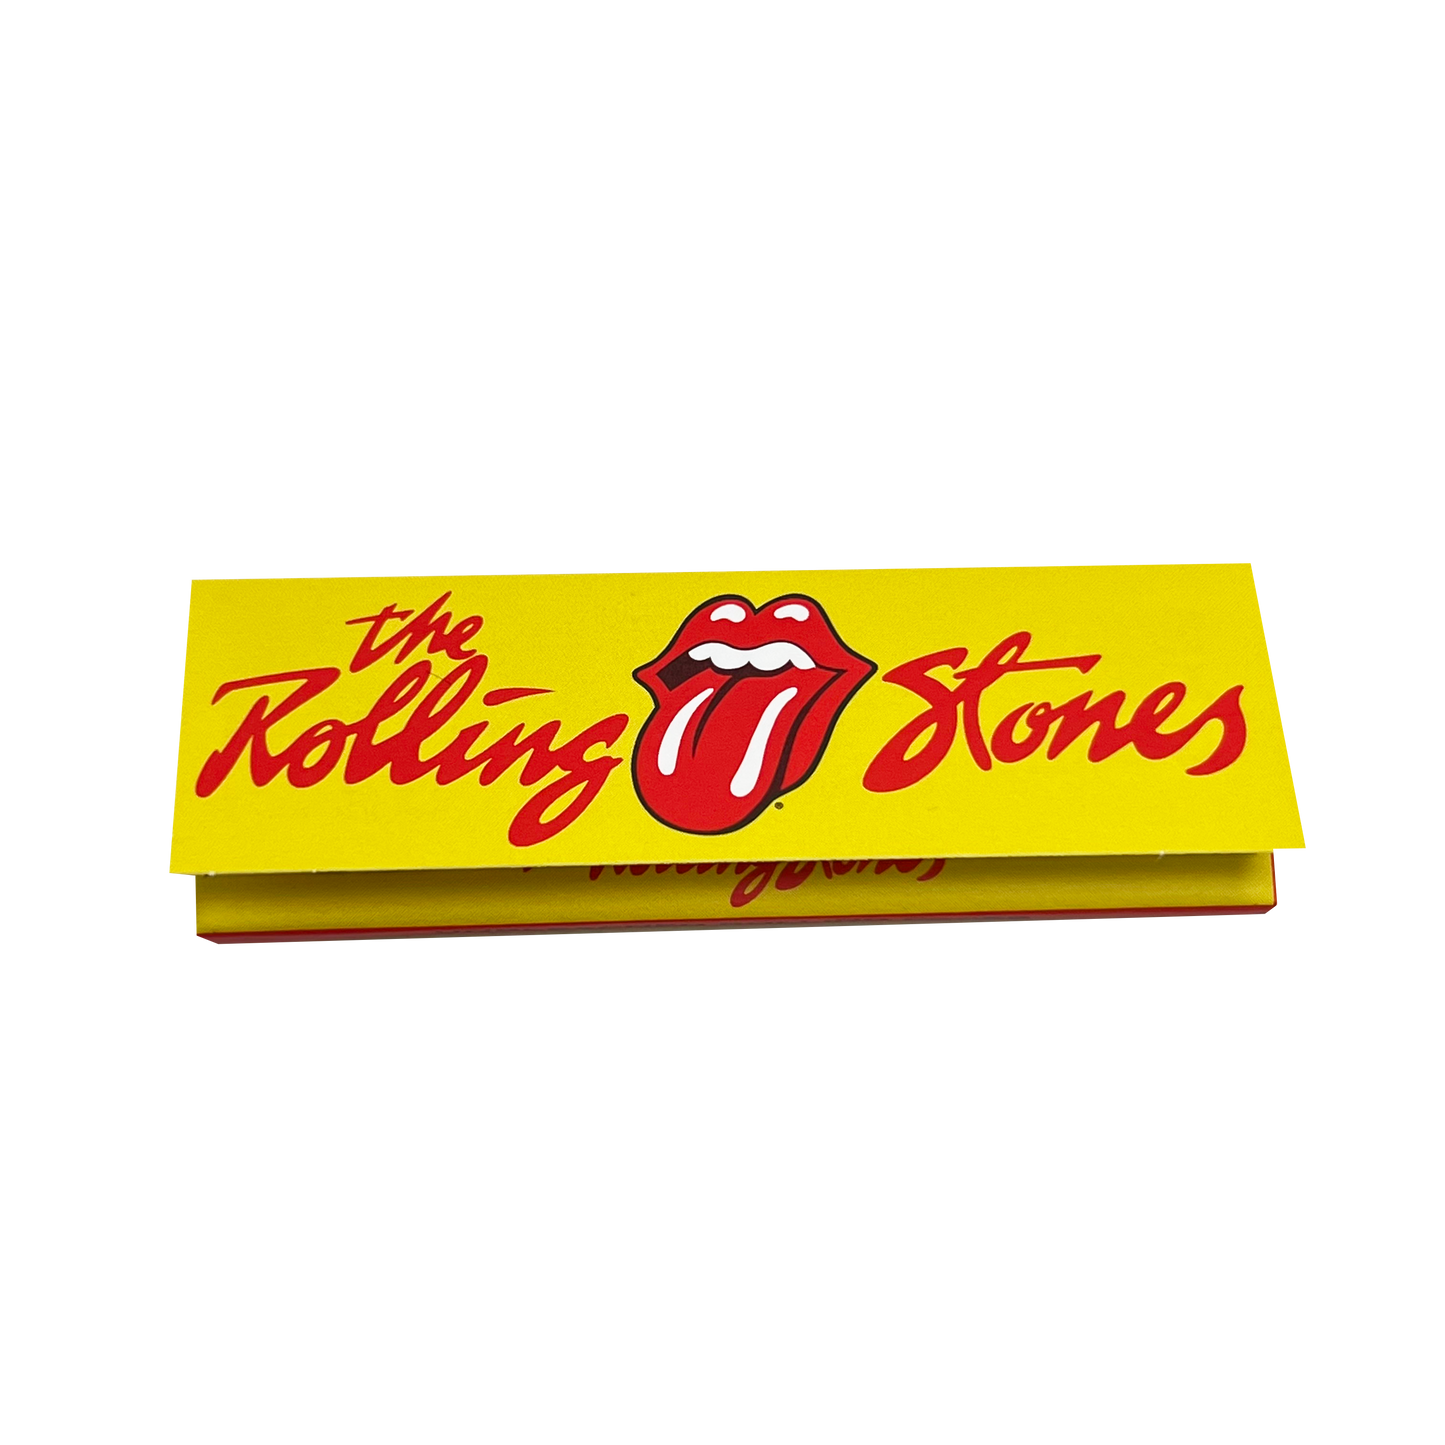 UNBLEACHED 1.1/4 ROLLING STONES